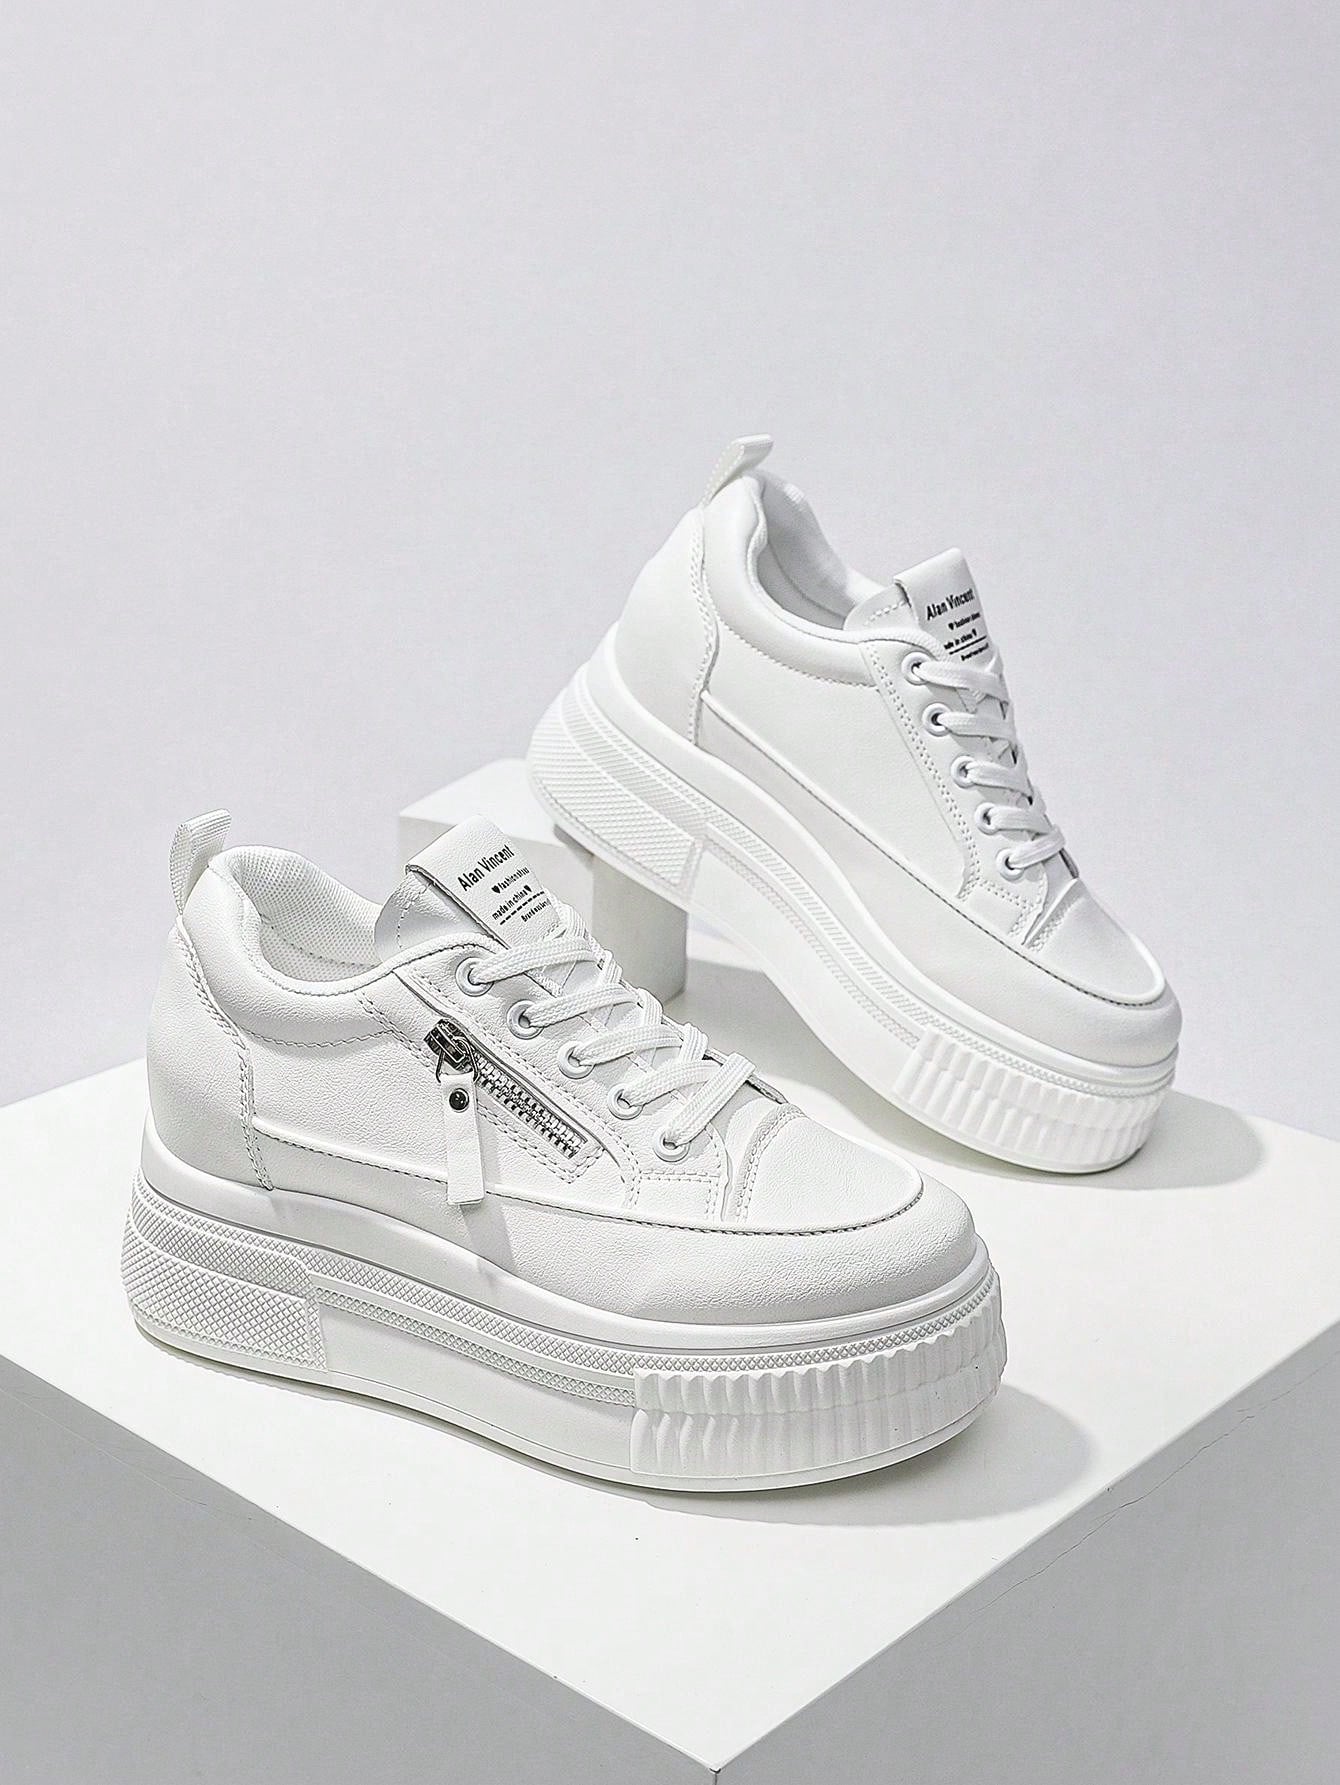 New Style Casual Shoes For Women, Ladies Platform Shoes With  Zipper, White Shoes, Outdoor Comfortable Sneakers, Internal Increase 5cm, Party Shoes, Suitable For Short Women-White-8